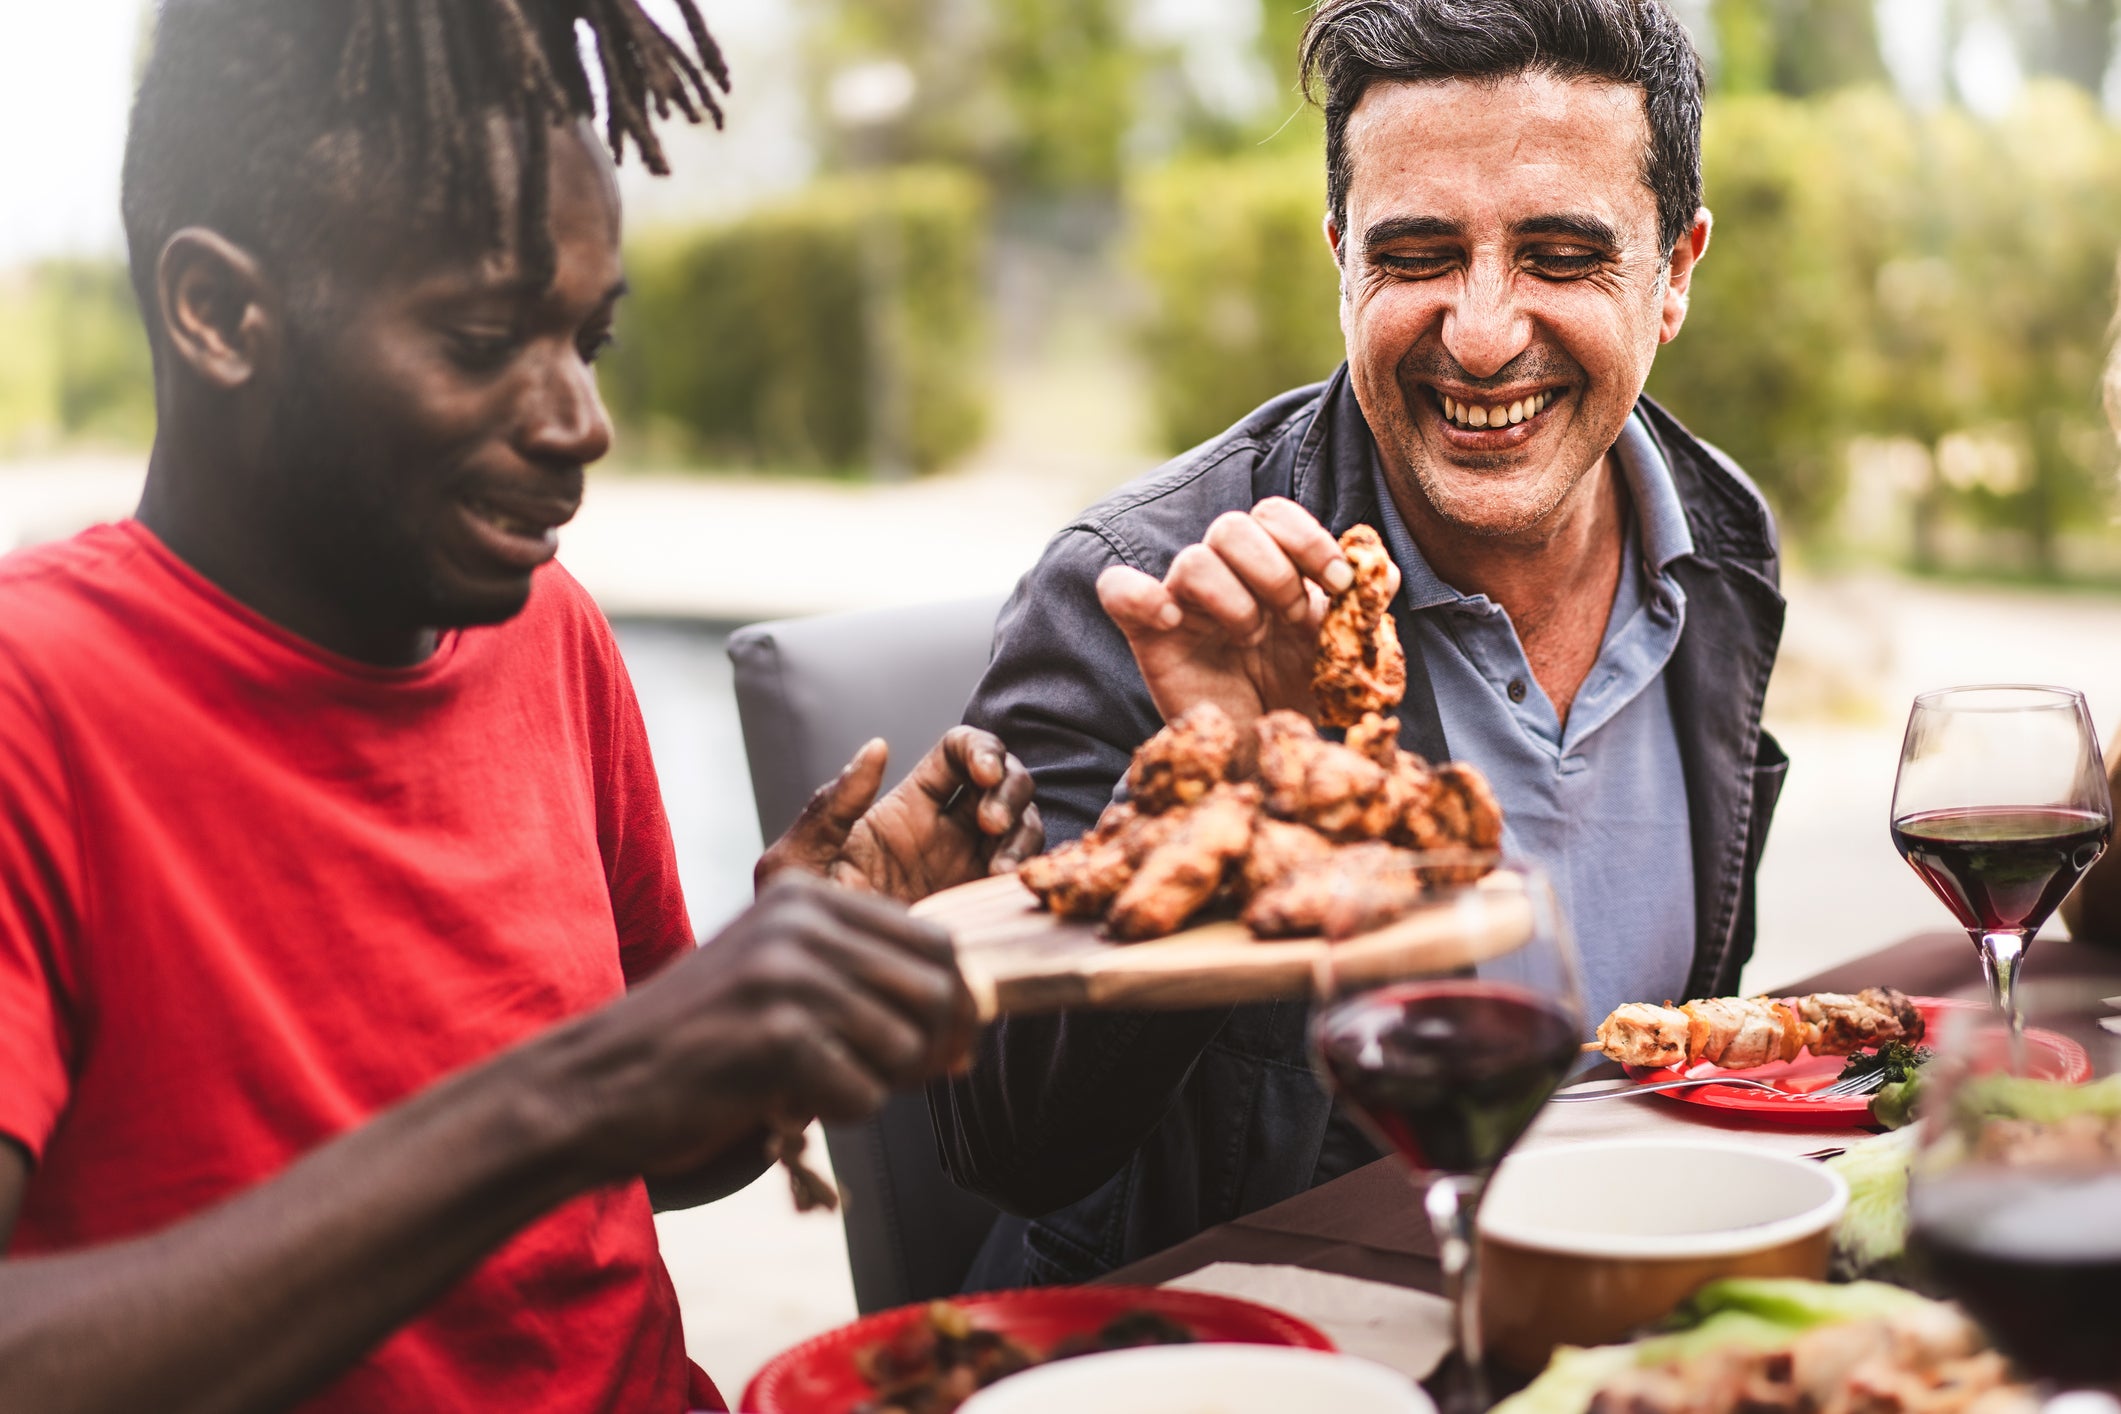 A man in a red shirt hands a tray of chicken wings to another man at an outdoor table lined with wine and food. Both men are smiling.